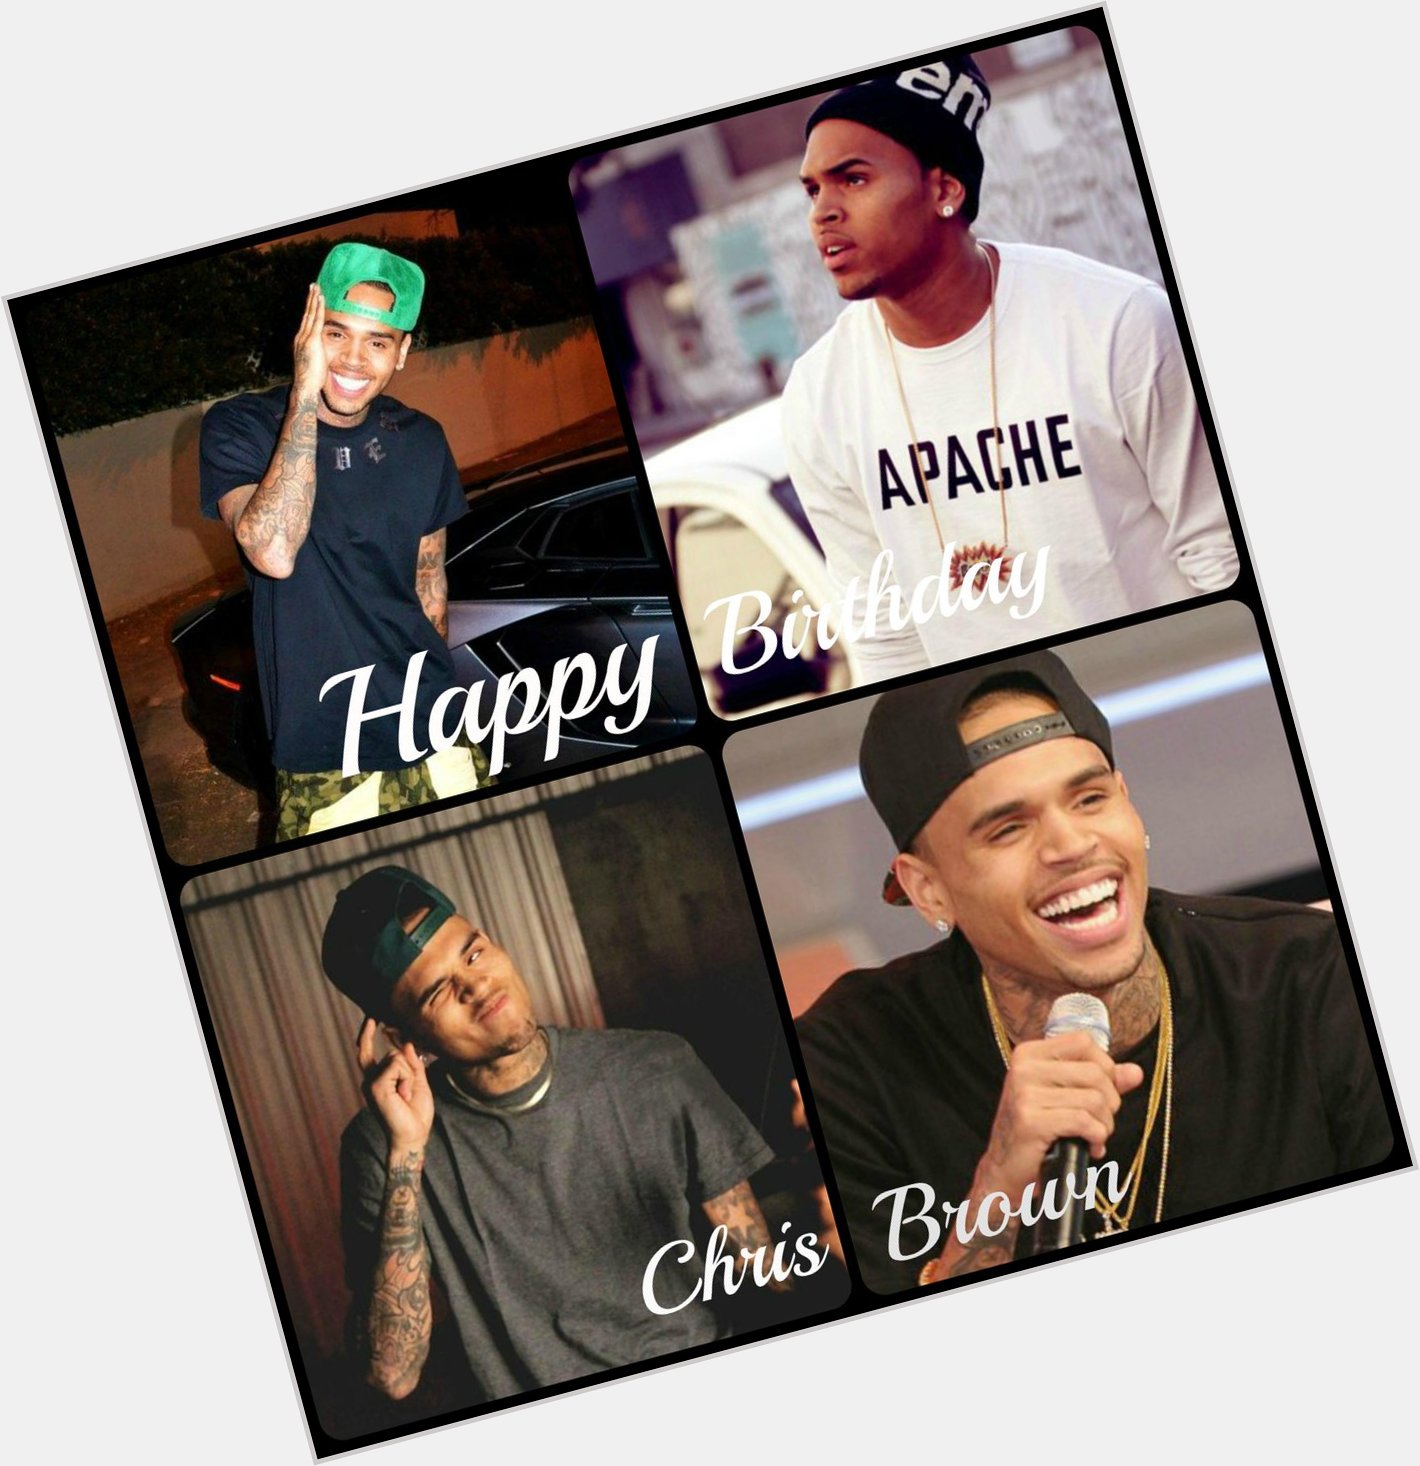  Happy Birthday Chris Brown! You\ve got that smile that only heaven can make! I love you <3 <3 05.05.1989 